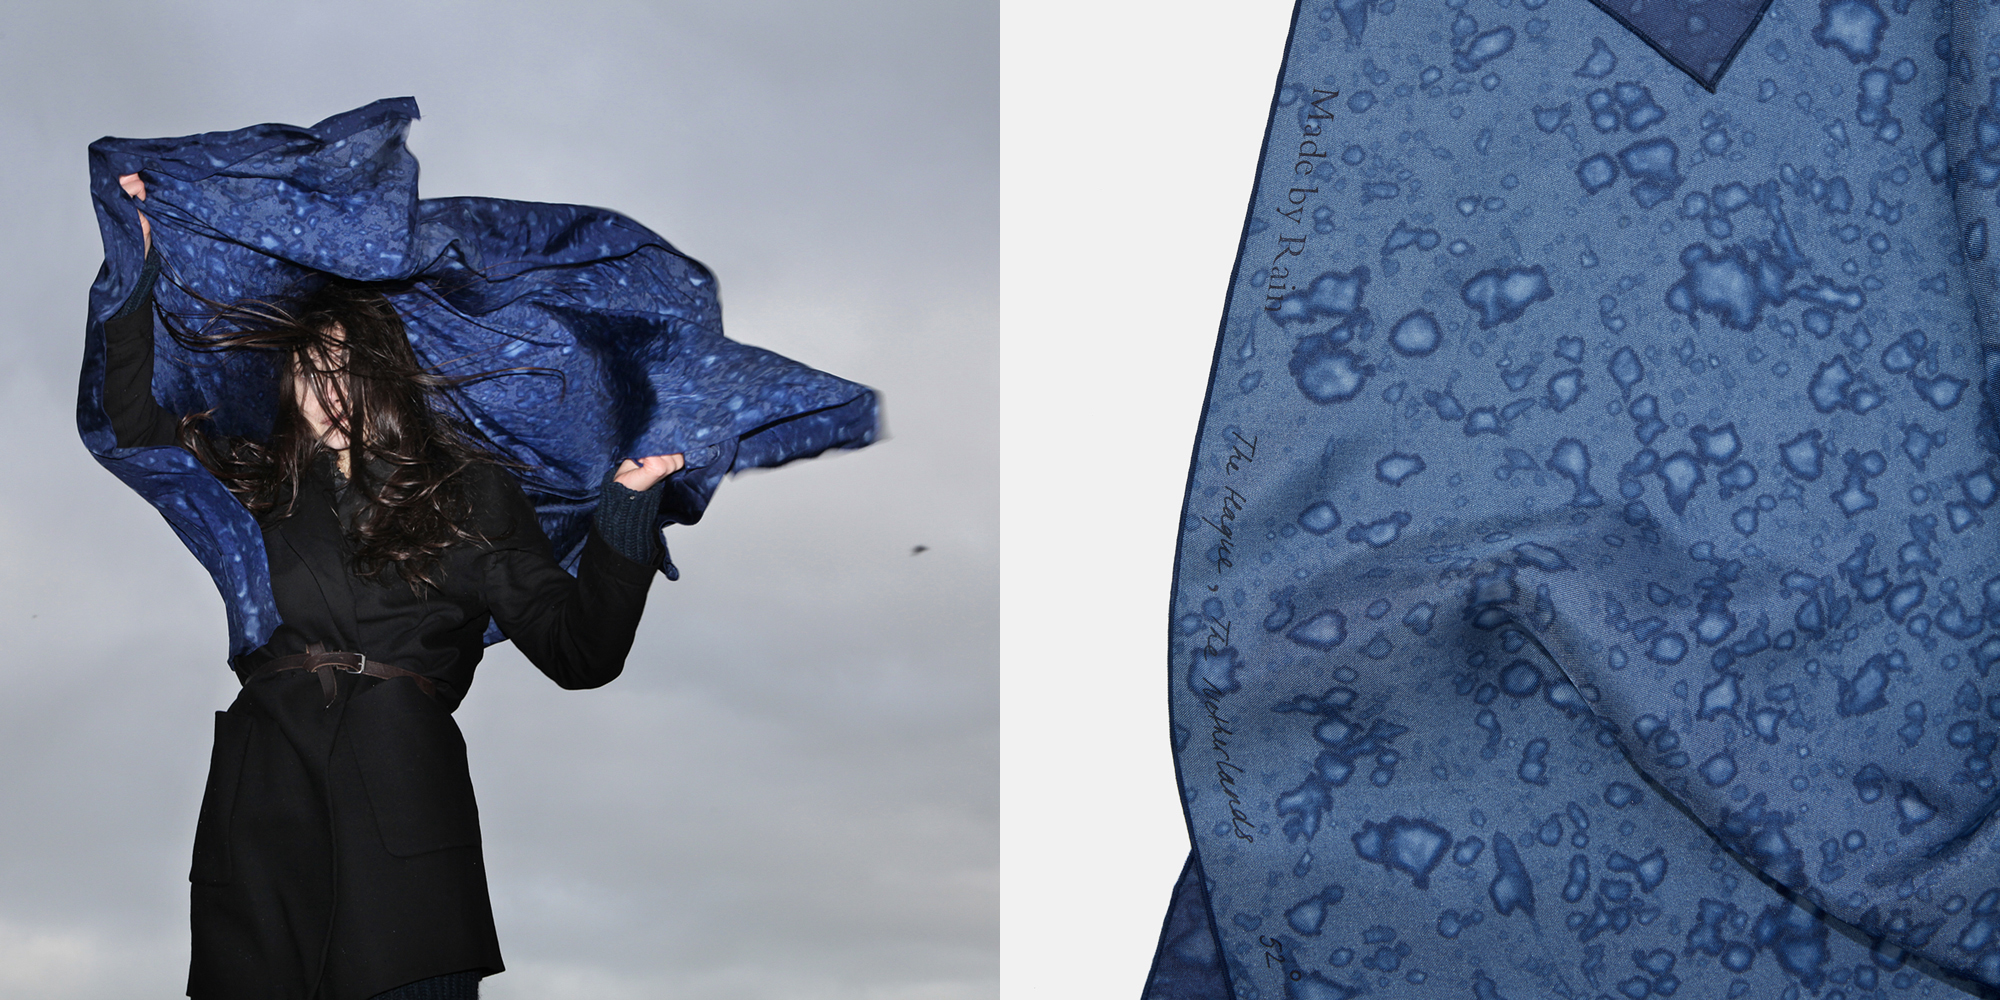 Diptcyh. On the left, a model whose long dark hair obscures her face lifts above her head a navy blue scarf speckled with an irregular pattern created by raindrops. The sky behind her is gray and stormy. On the right is a detail view of the scarf. Its blue surface is lighter where raindrops have touched it, and the selvedge contains the handwritten inscription, The Hague, The Netherlands.